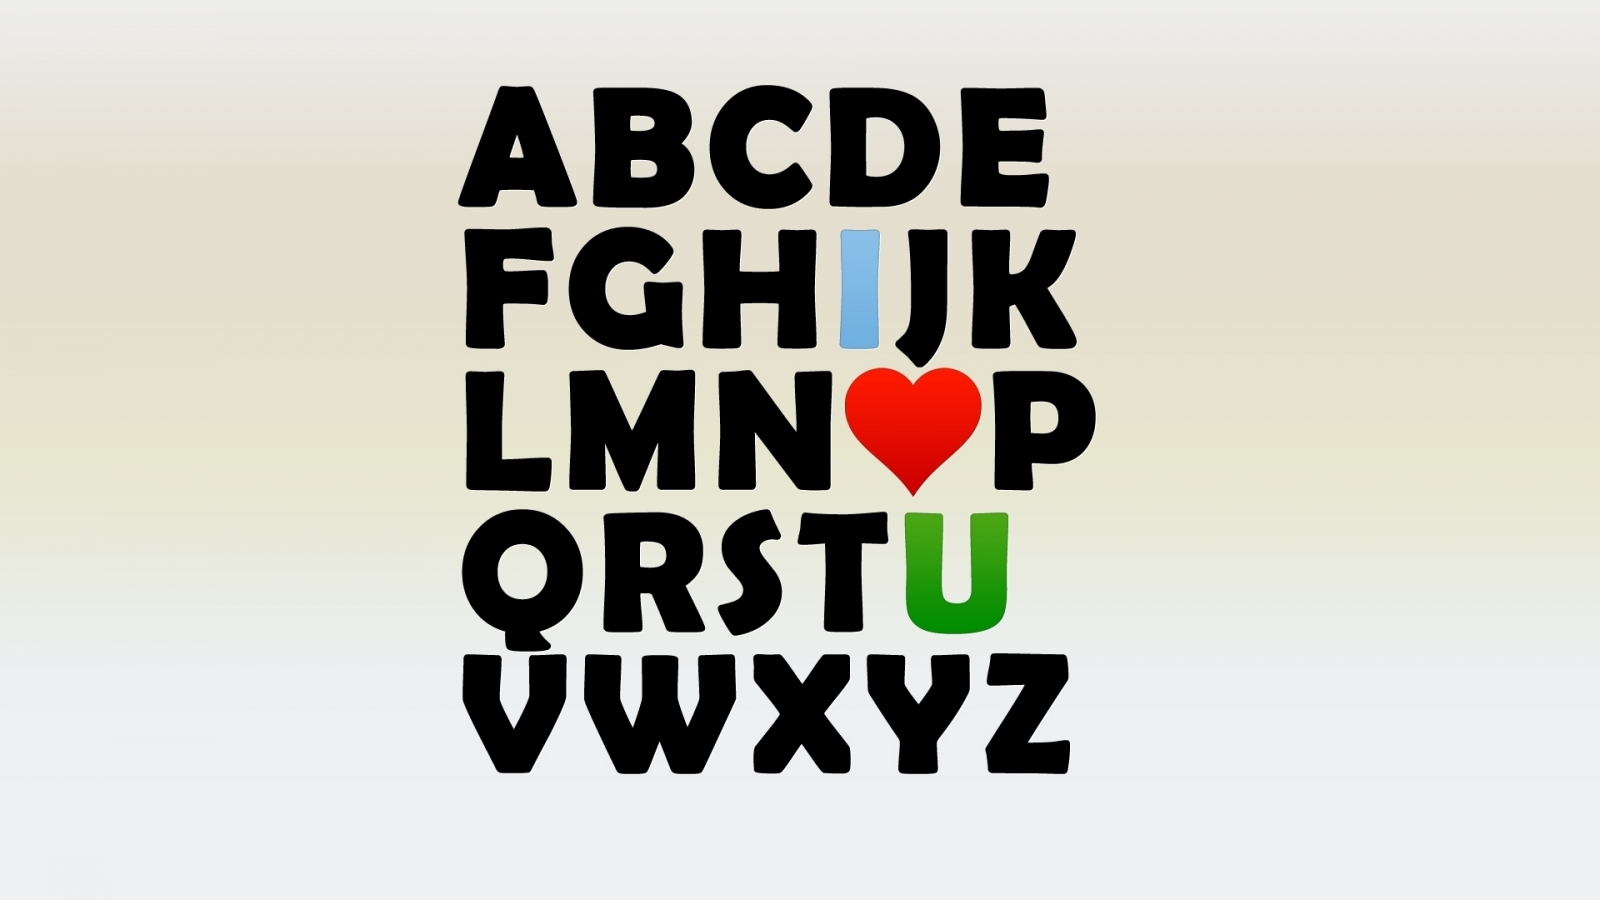 Alphabet Letters Wallpaper   HQ Wallpapers download 100 high 1600x900